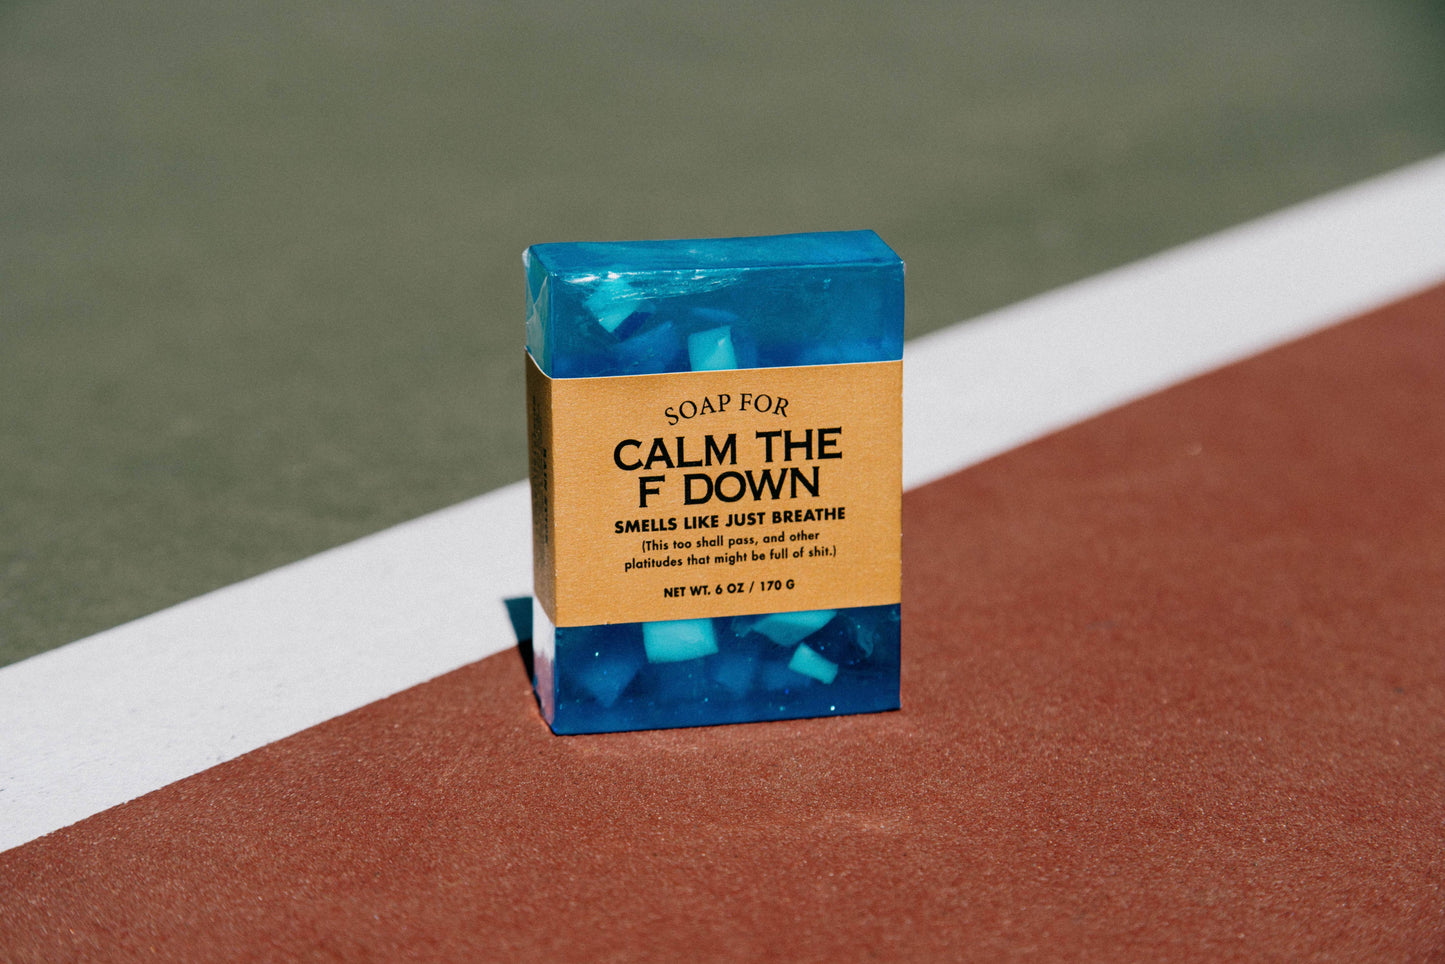 A Soap for Calm the F Down | Funny Soap